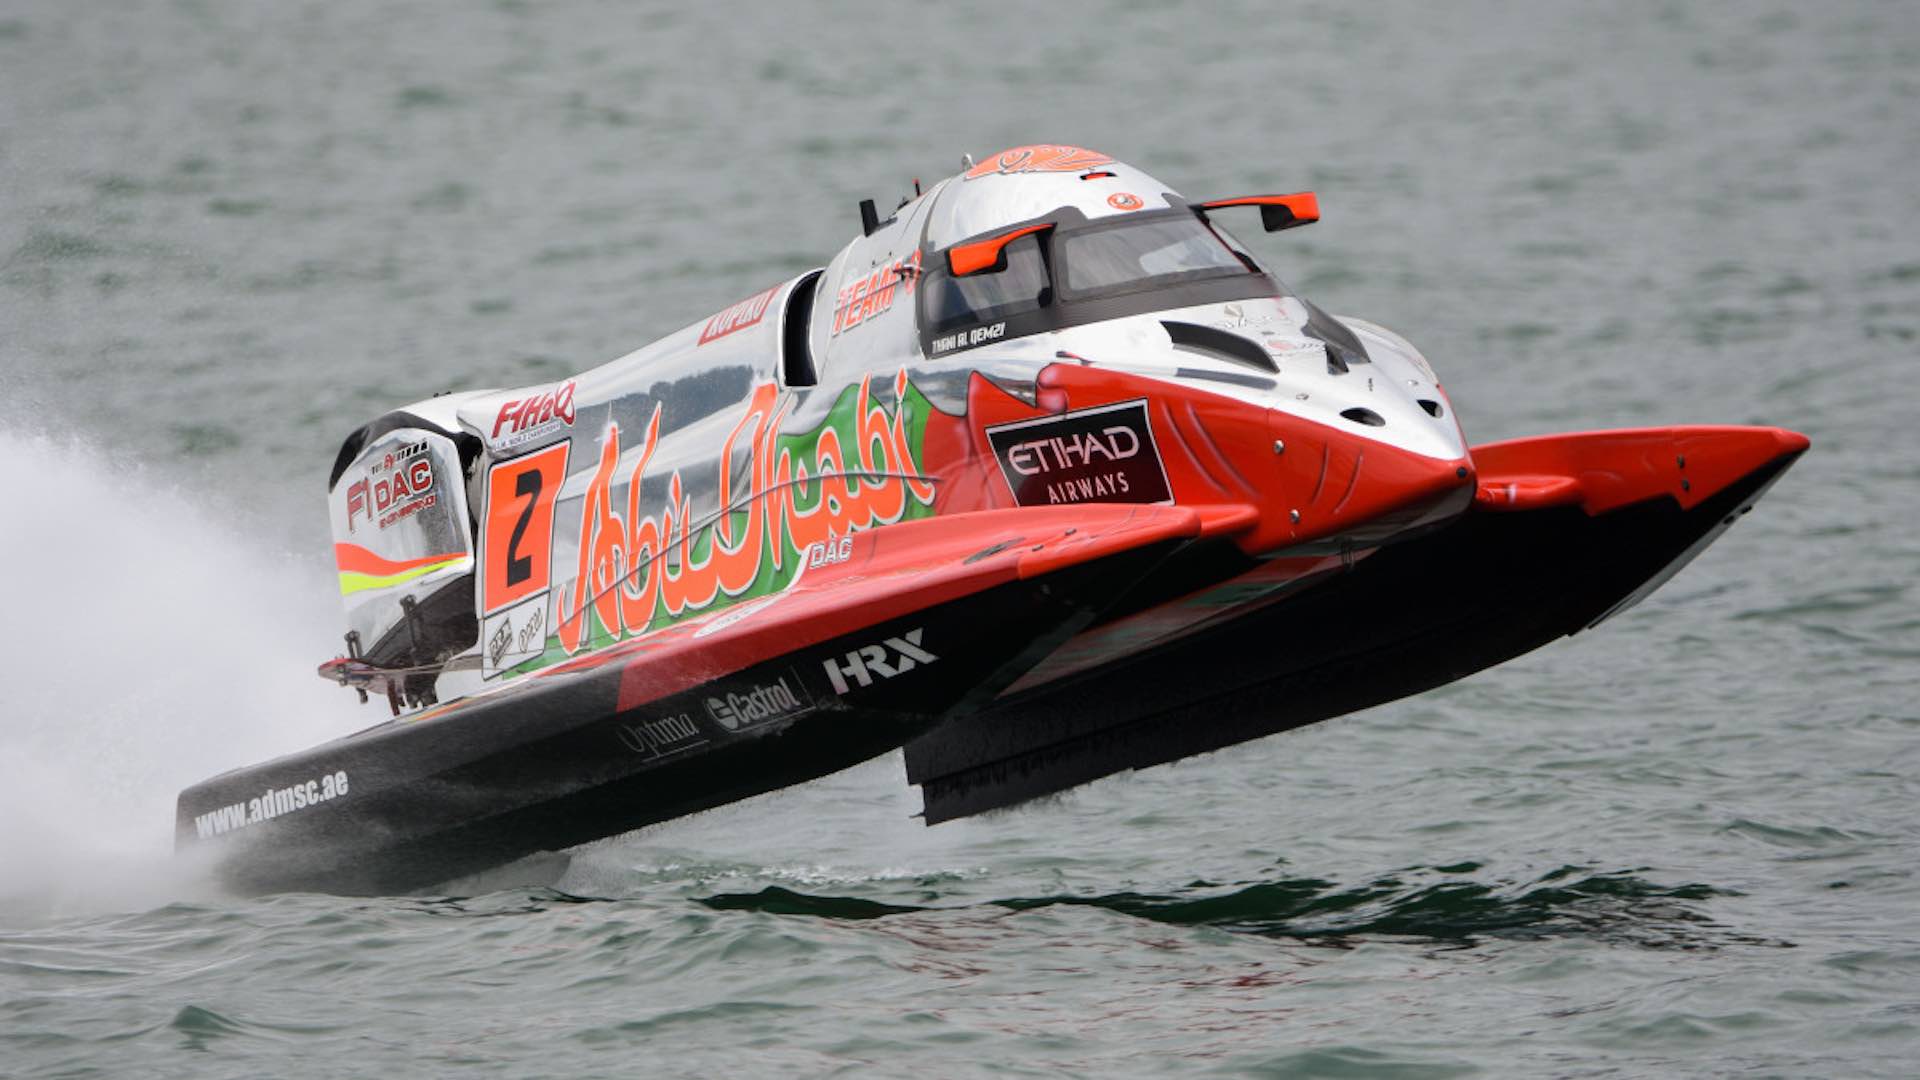 Abu Dhabi Powerboat team geared up to defend UIM F1H2O World Championship title